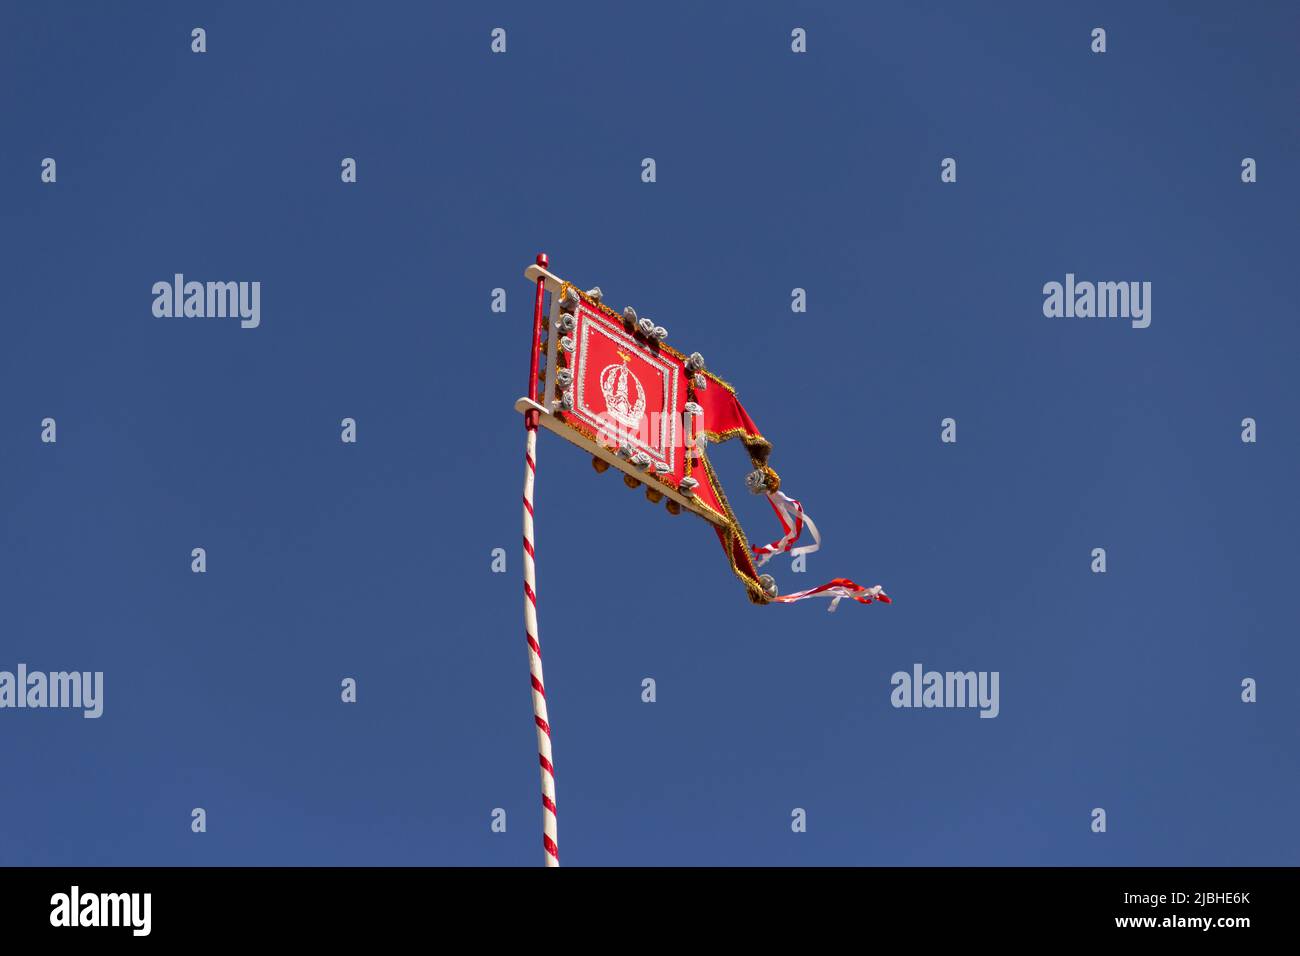 Pirenópolis, Goiás, Brazil – June 05, 2022: A flag with the crown of the Divine Eternal Father embroidered on a pole, with flags around it. Stock Photo